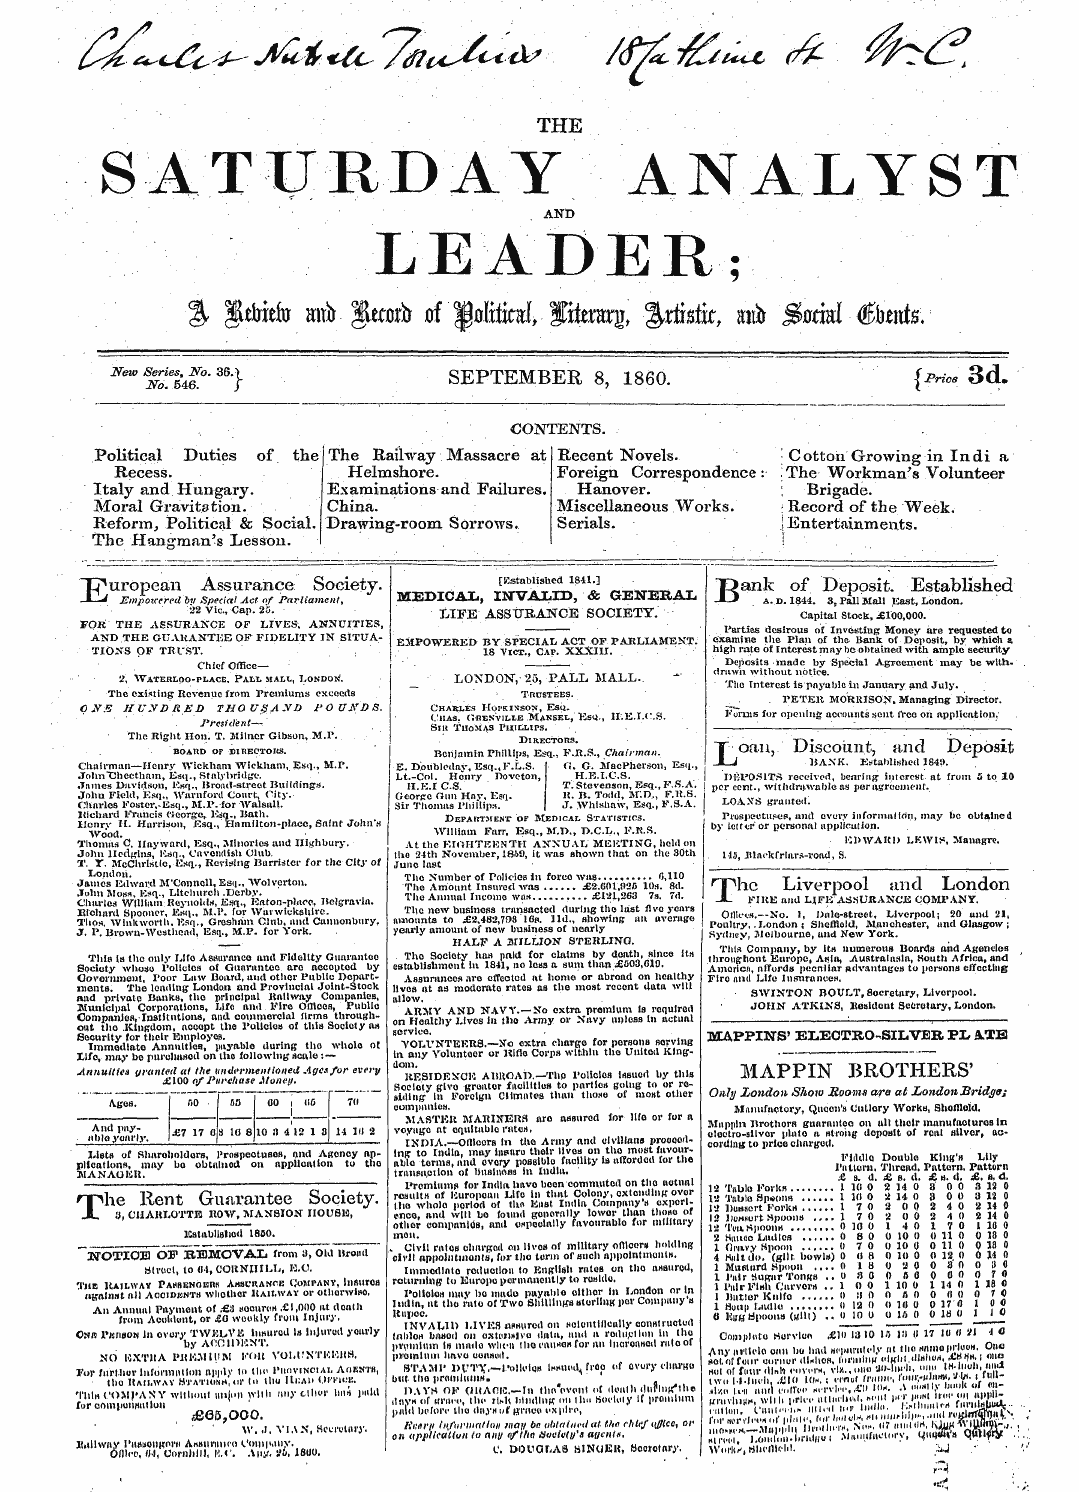 Leader (1850-1860): jS F Y, 2nd edition - The Saturday Analyst • - ¦ ' ¦ ' ¦ ¦ ' '...